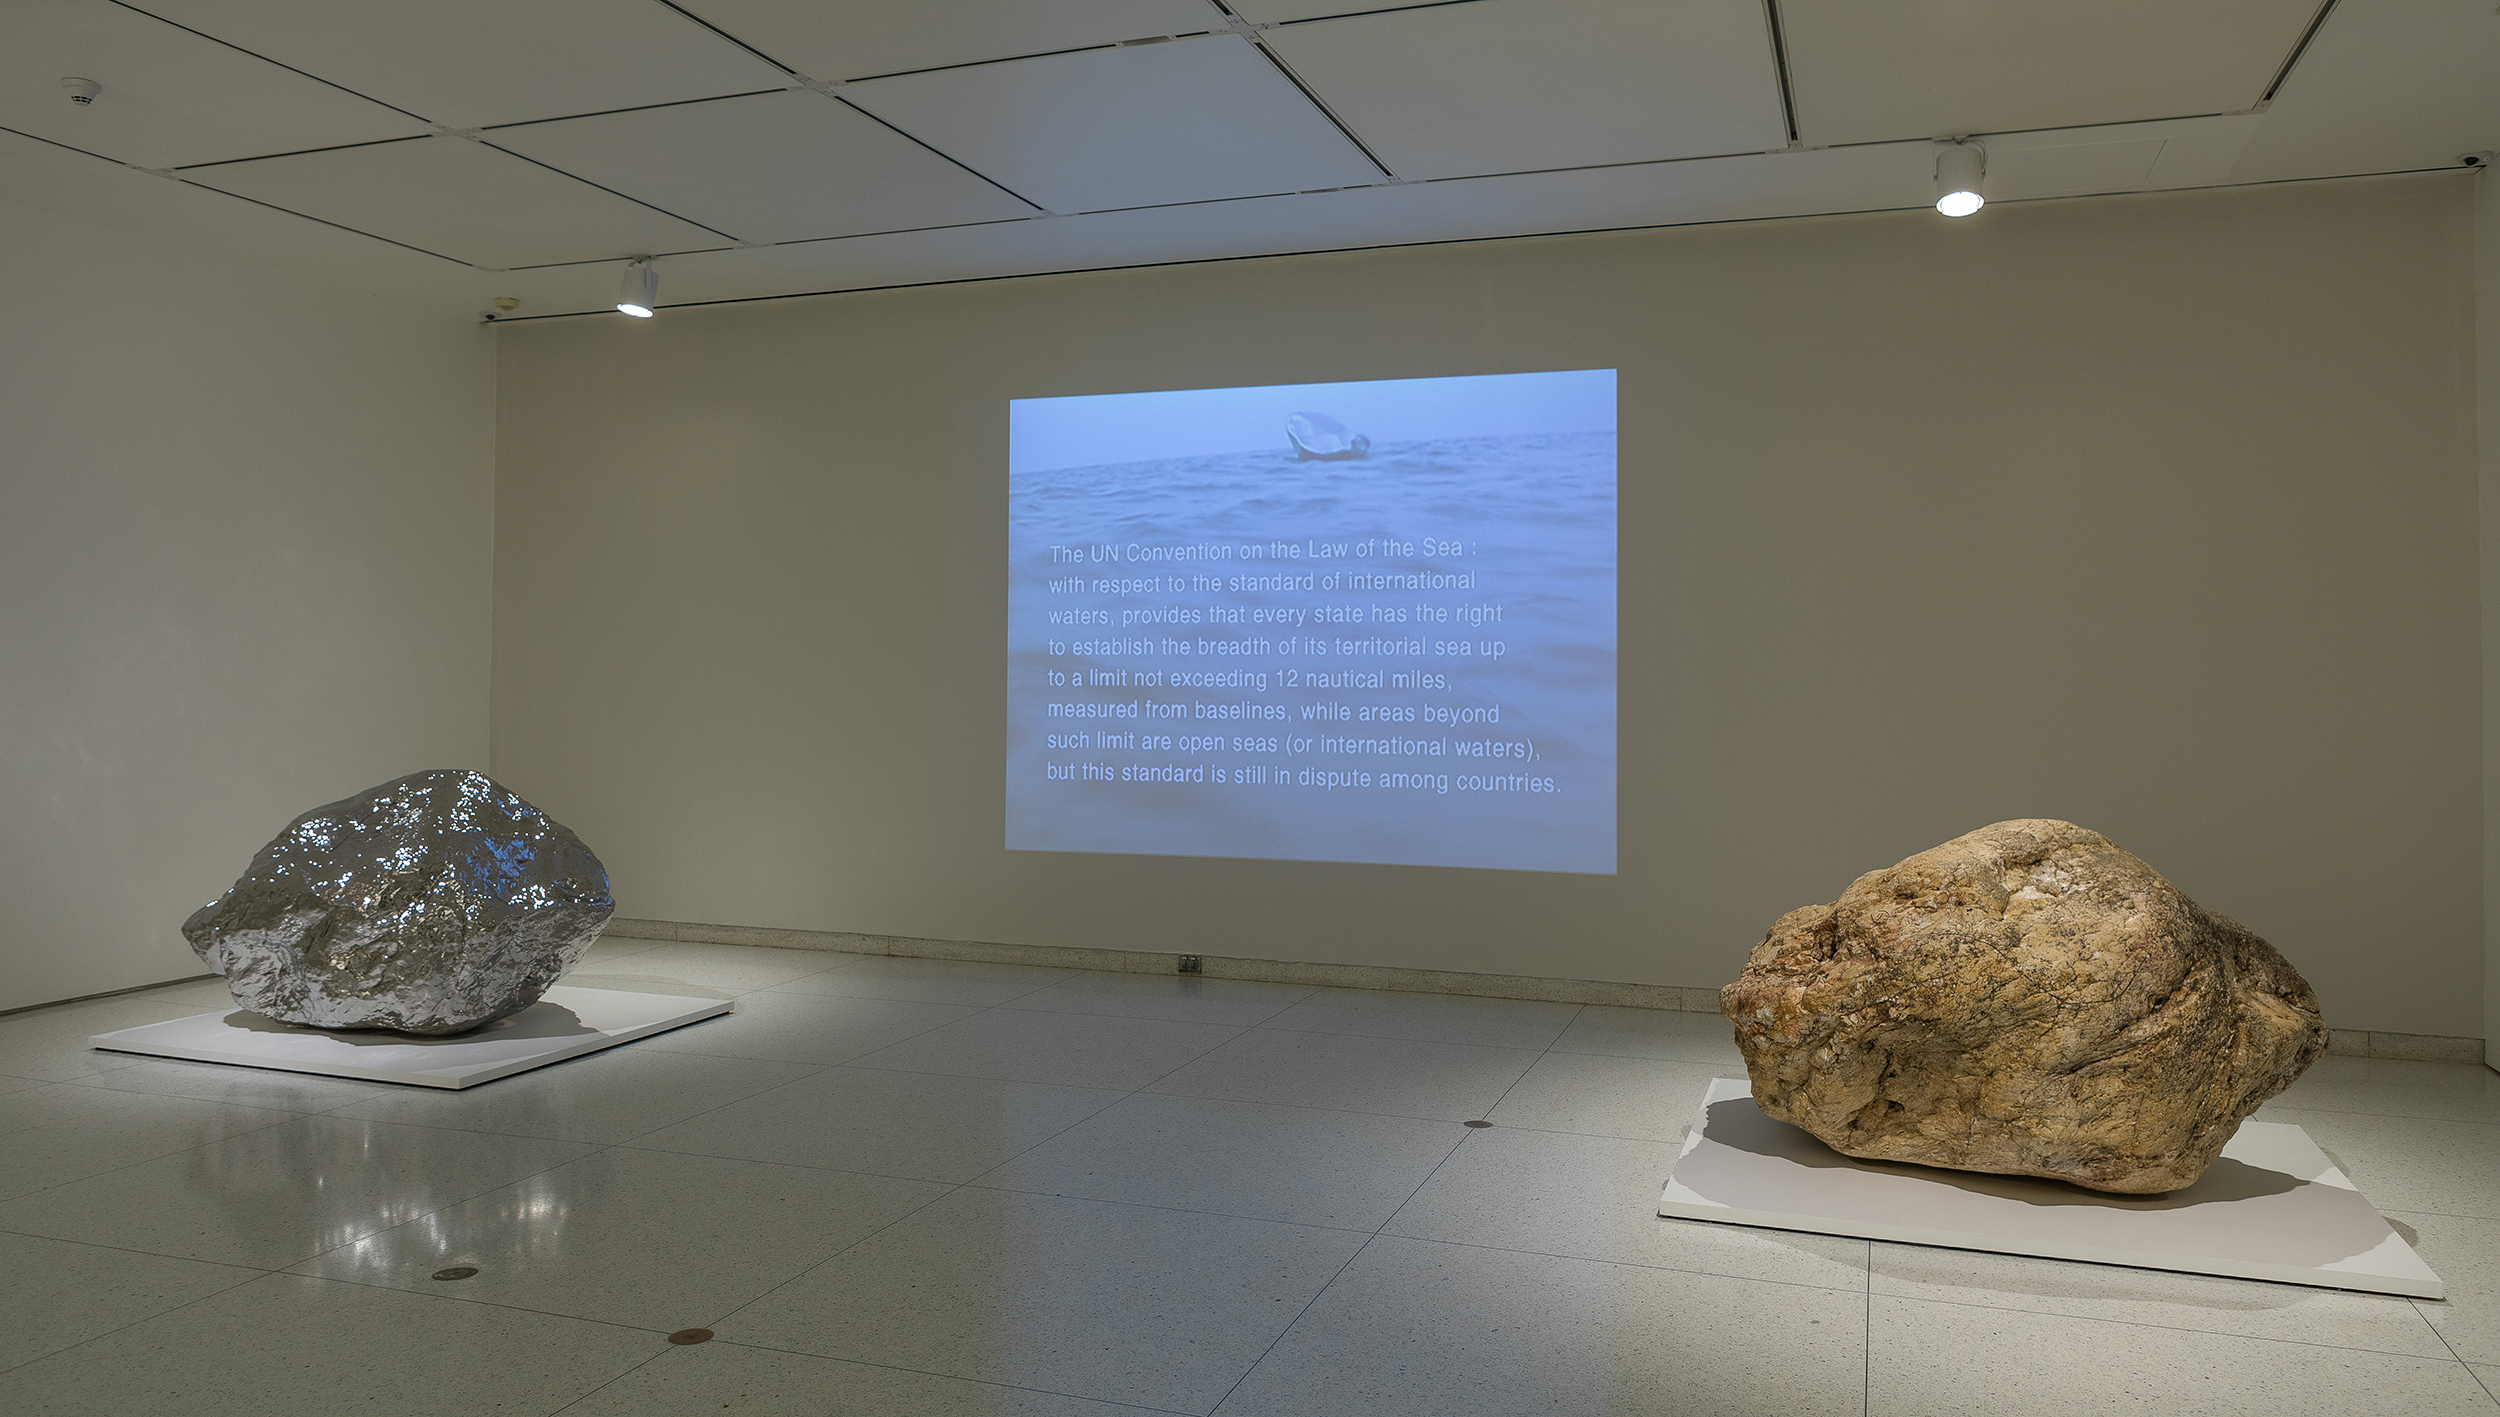 Zhan Wang, Gold Mountain, 2007, and Beyond 12 Nautical Miles—Floating Rock Drifts on the Open Sea, 2000